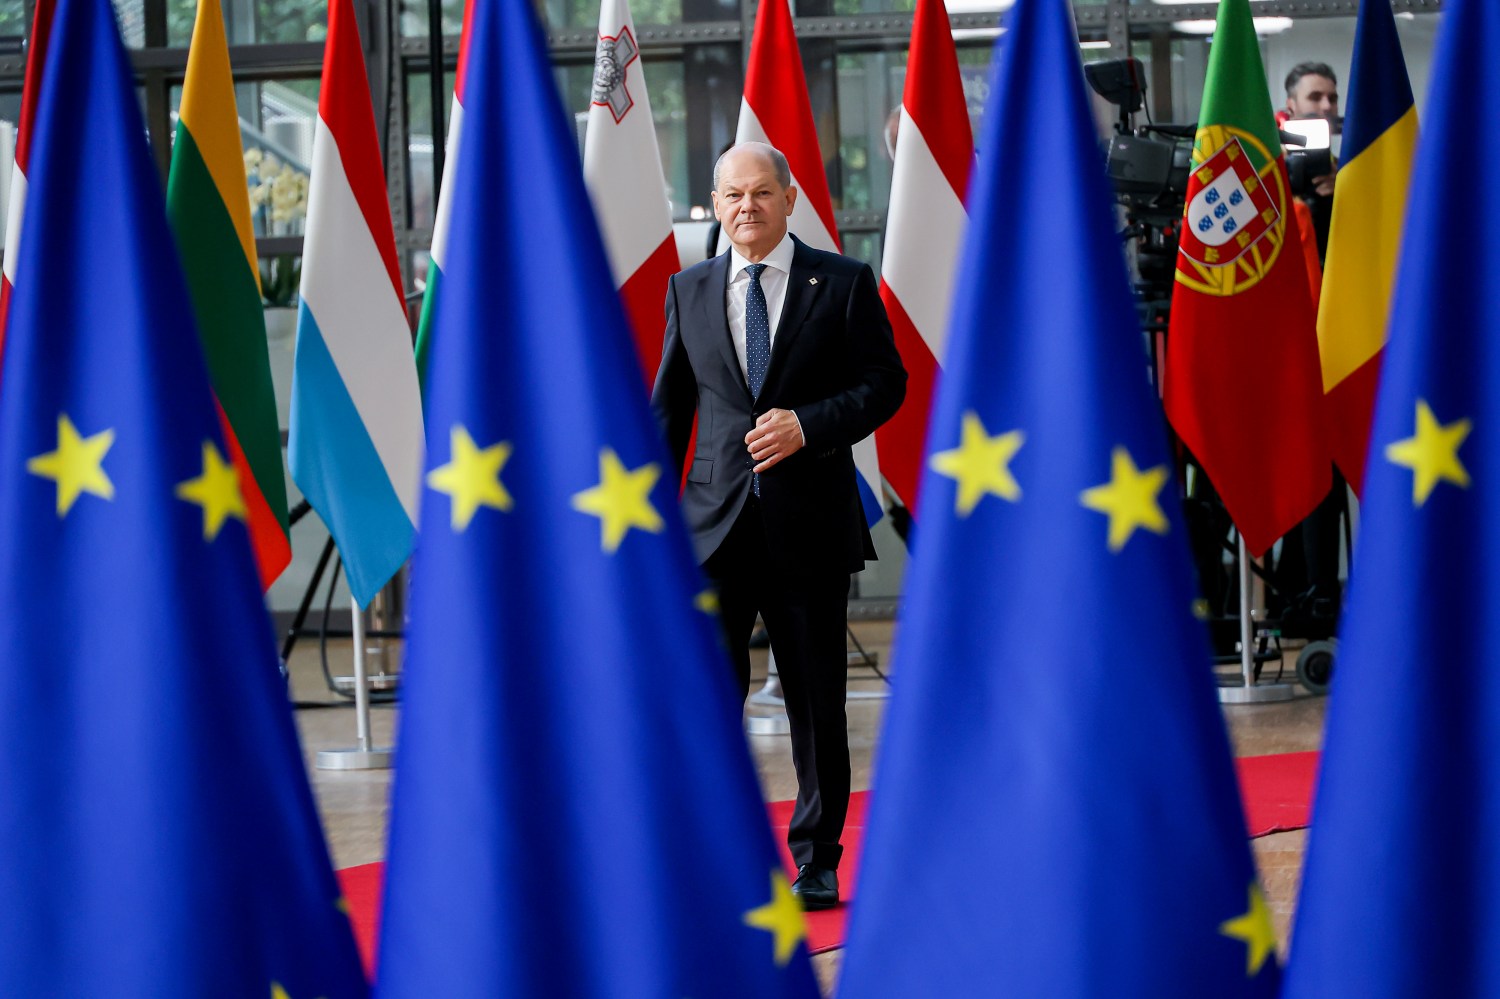 Olaf Scholz Federal Chancellor of Germany arriving at the EU summit, walking next to the European flags, flag of Europe and talks to the media while is answering questions to the press and journalists. Meeting of the EU leaders summit. The European Council in Brussels, Belgium on October 20, 2022 (Photo by Nicolas Economou/NurPhoto)NO USE FRANCE